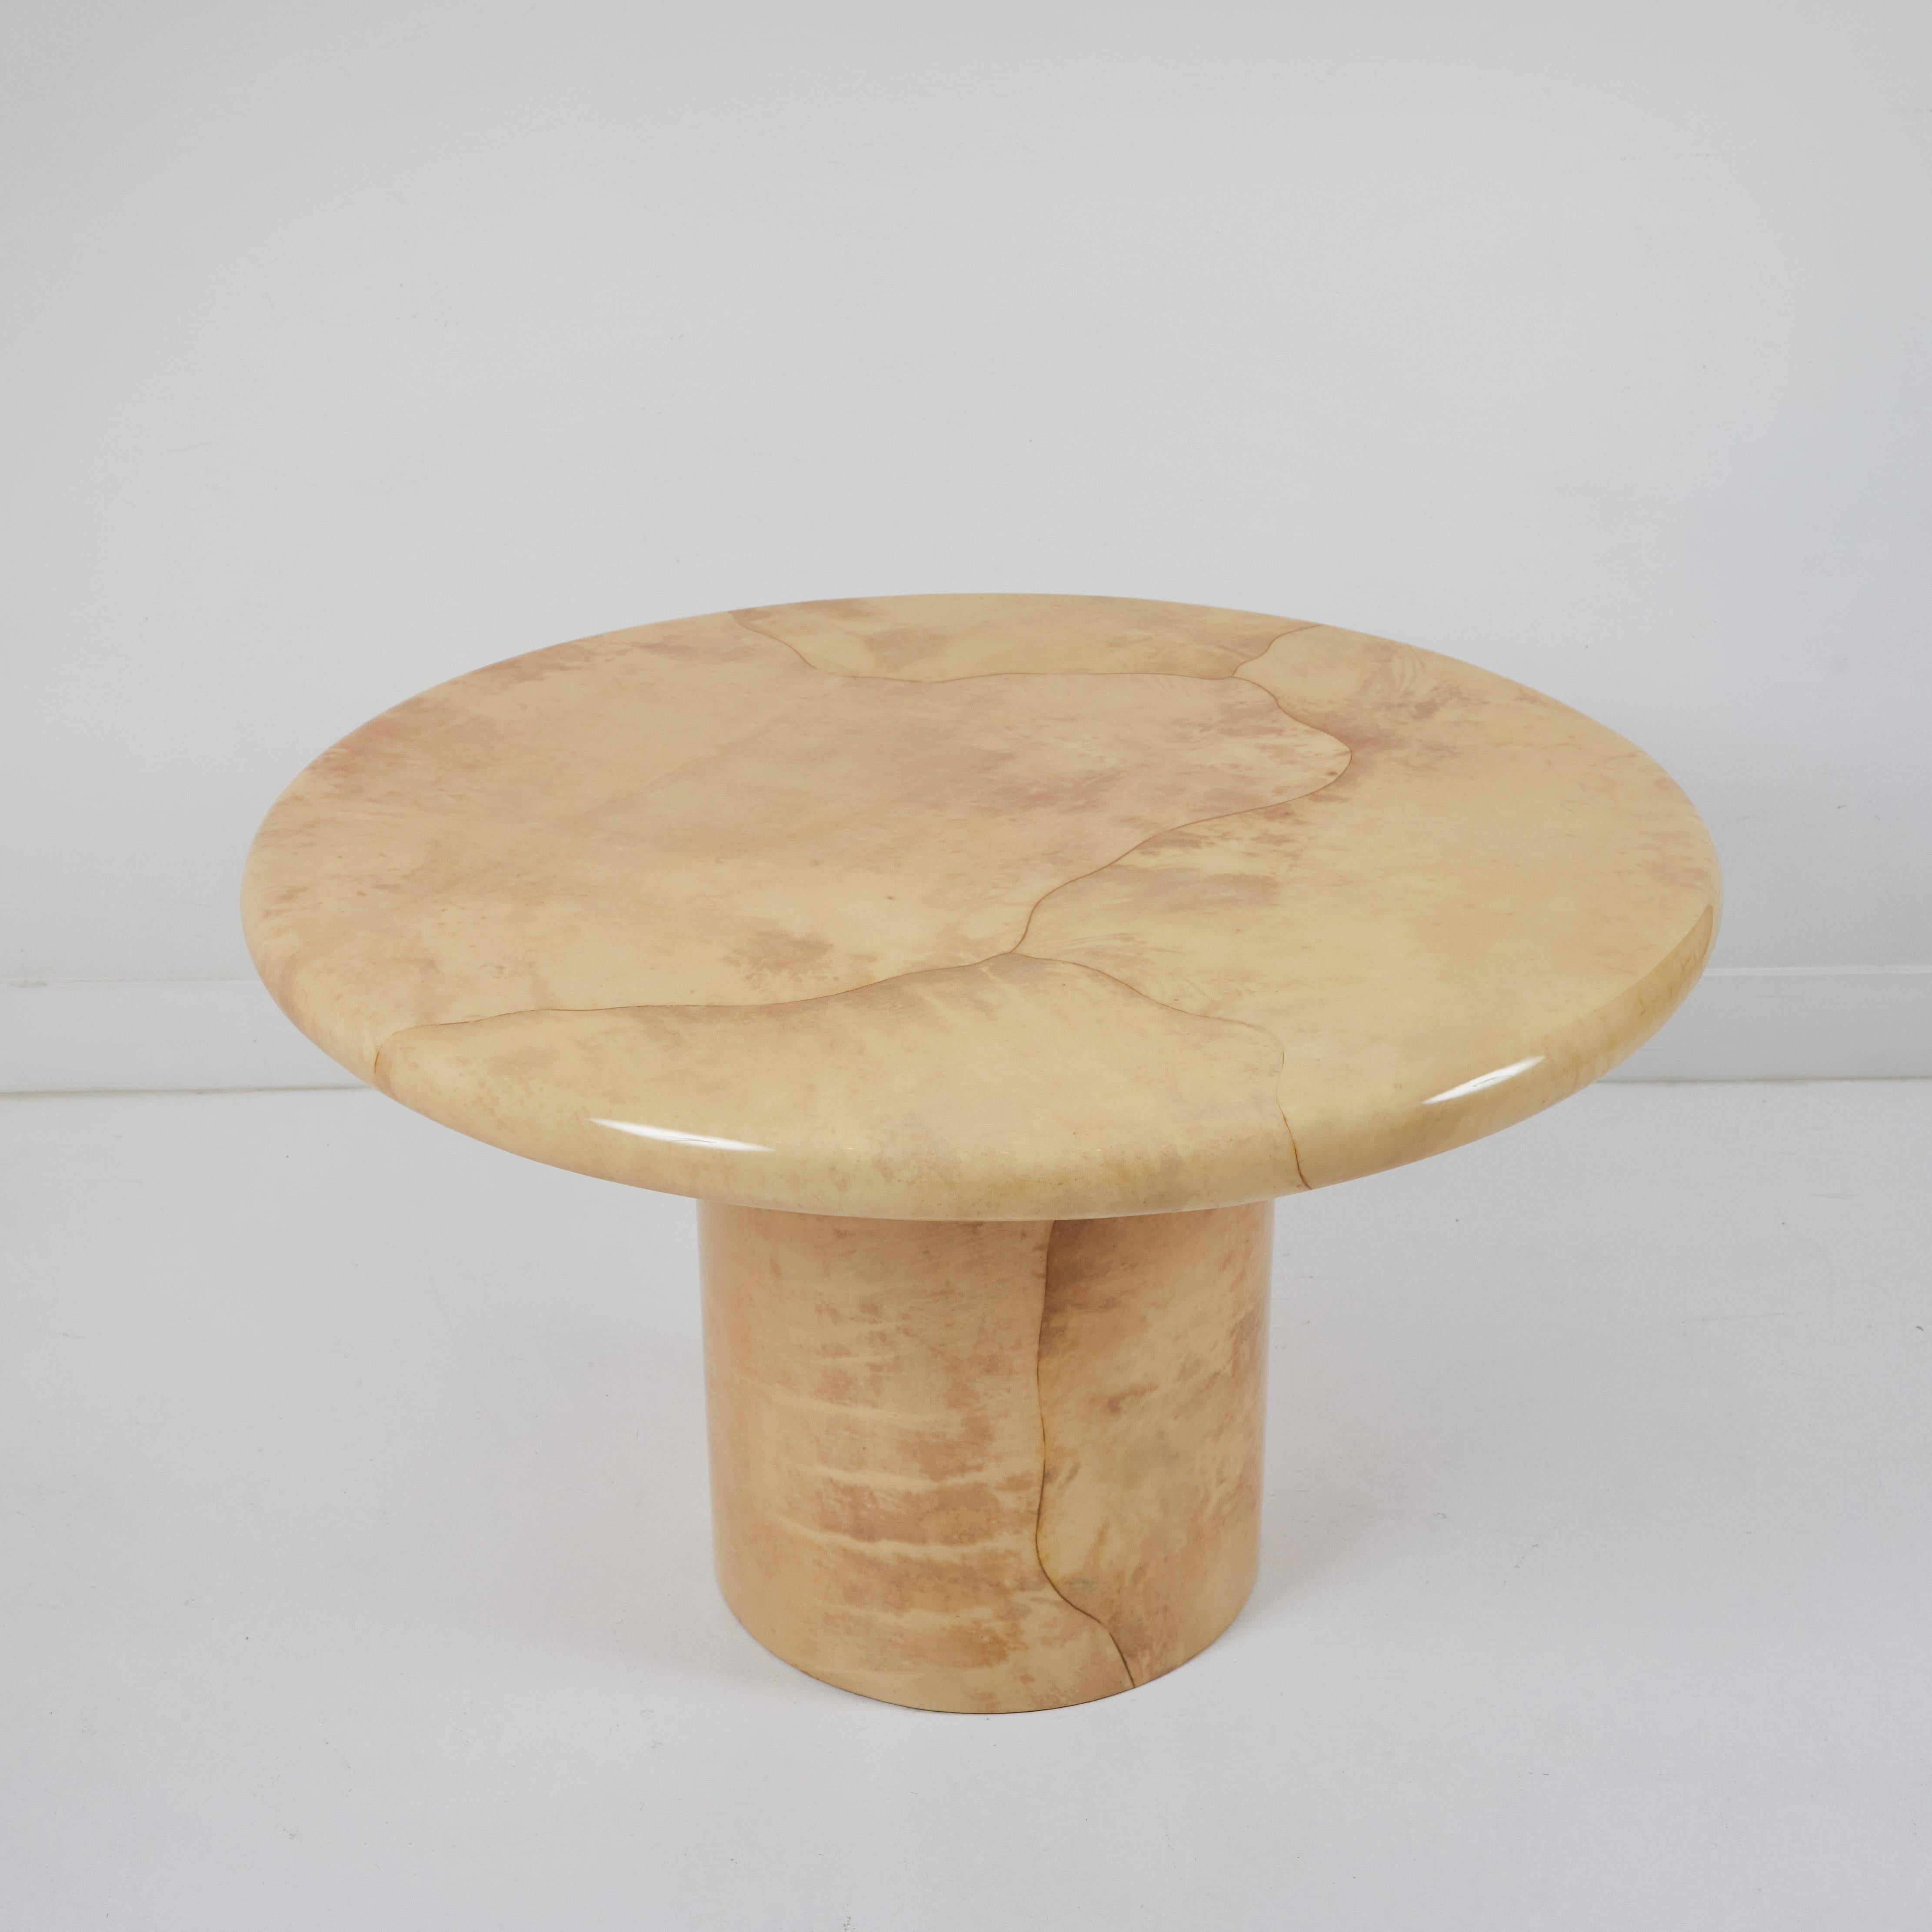 Beautiful pedestal table designed by Karl Springer and manufactured in 1985. this table exhibits all the classic features of Springer's work from the 1980s. the freeform application of the parchment, the very substantial bullnose edge of the top and